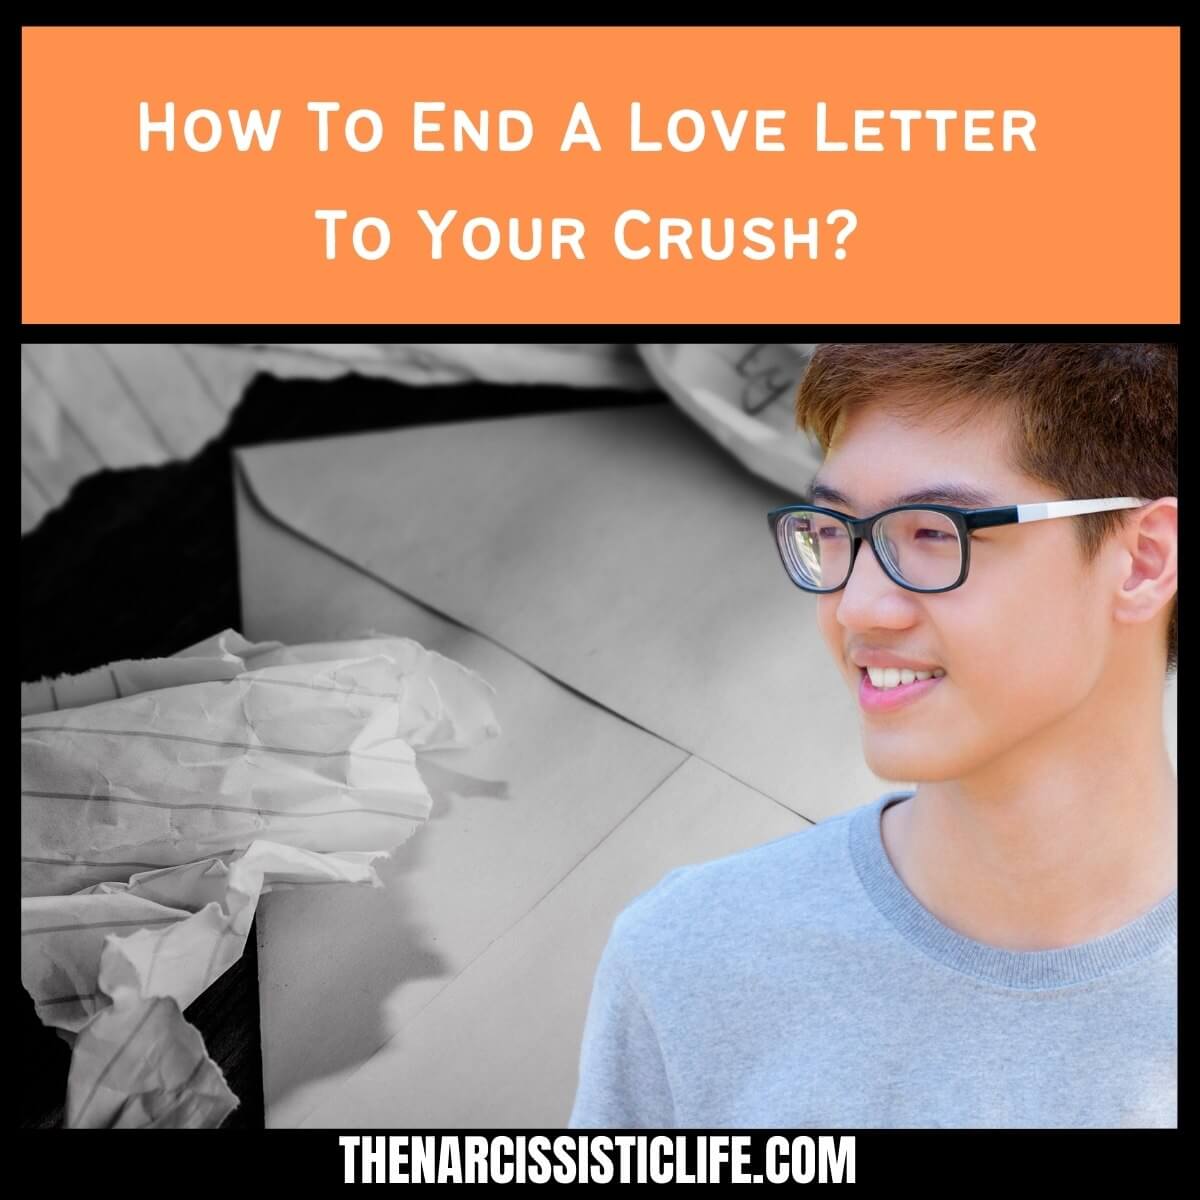 How To End A Love Letter To Your Crush?